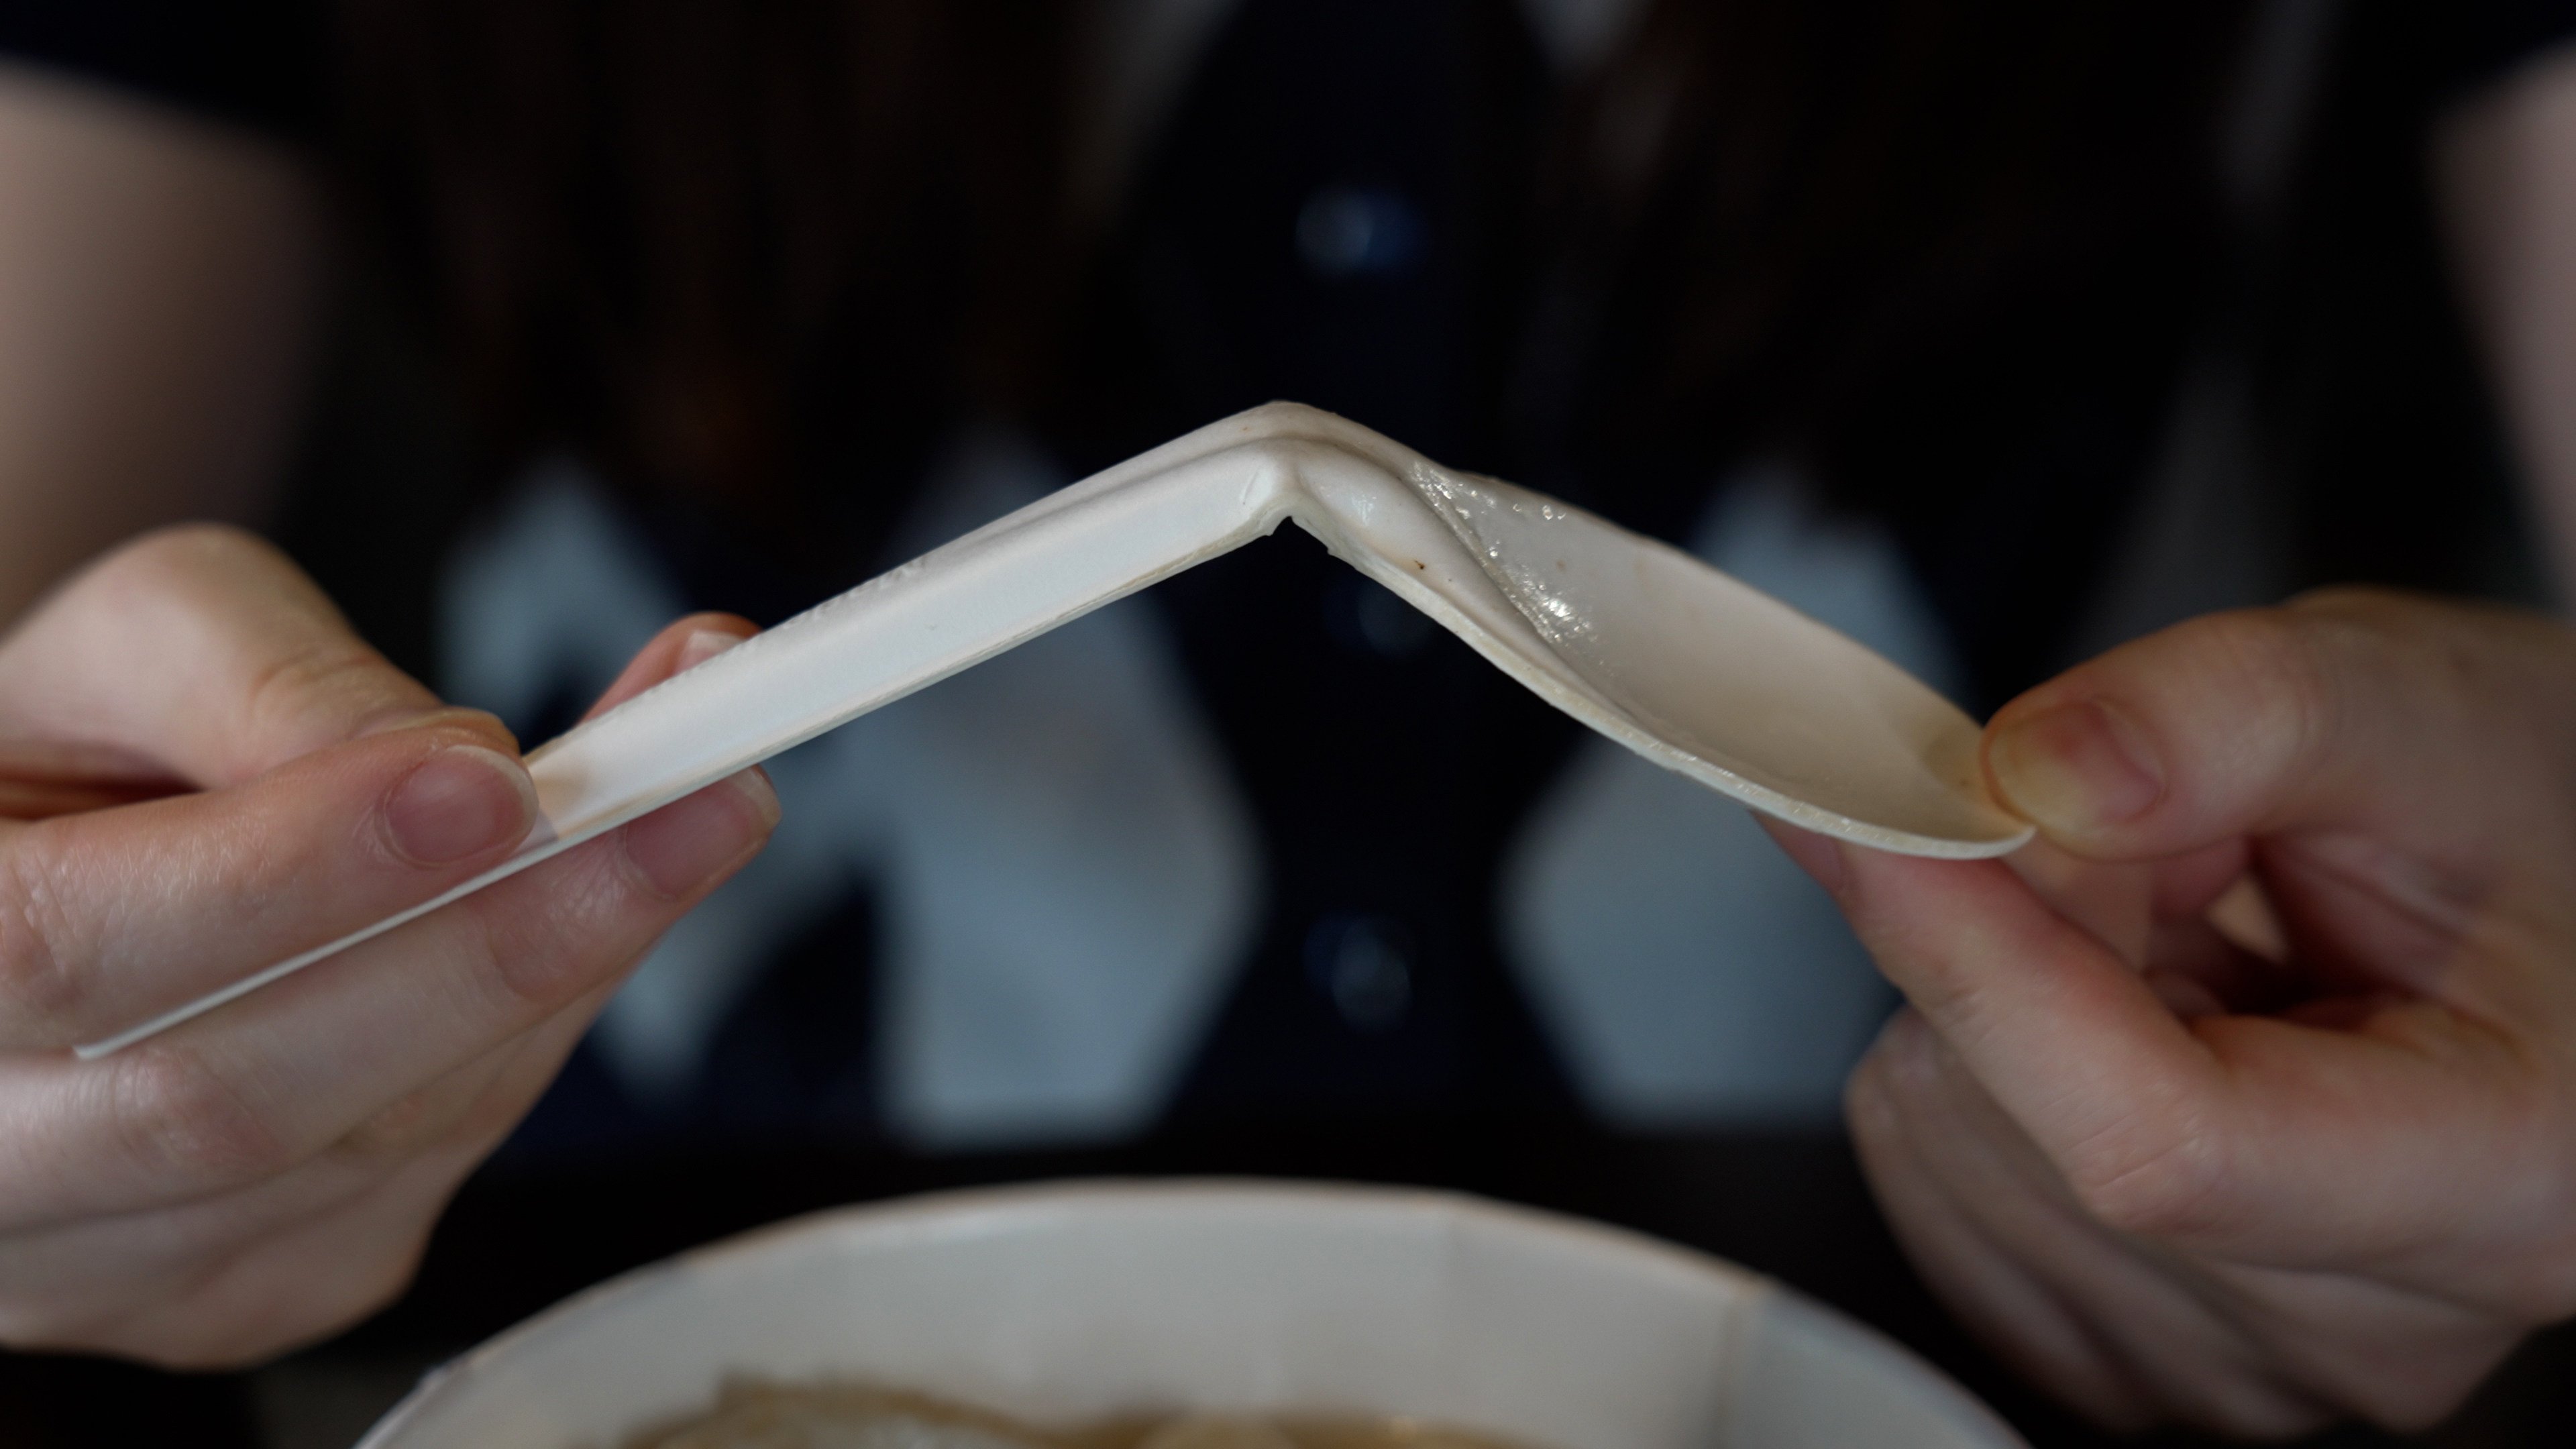 Some paper spoons are just not up to the job. Photo: SCMP